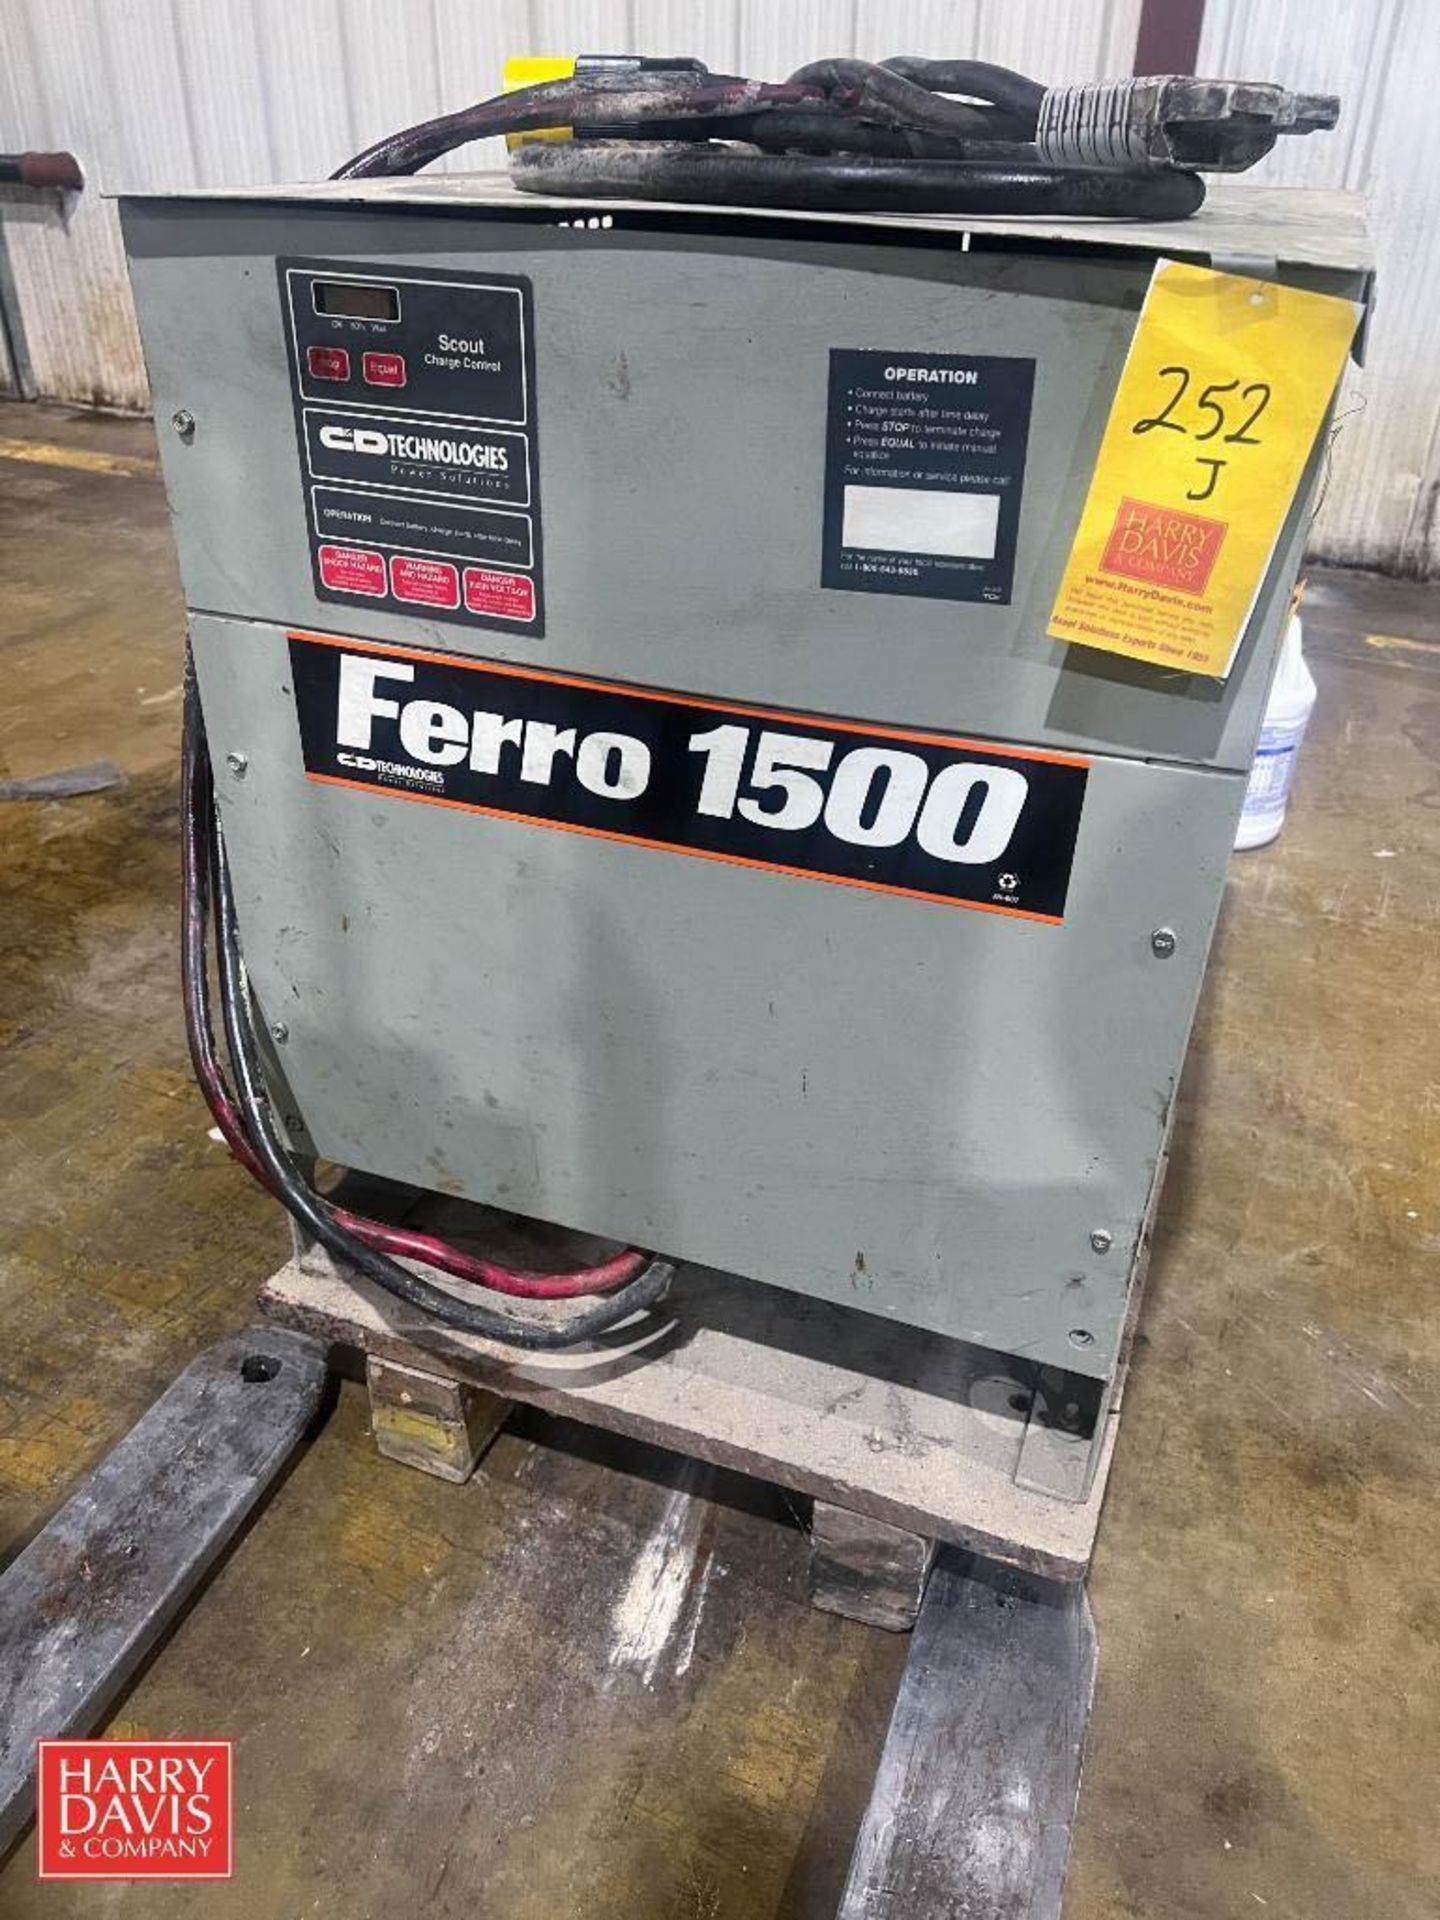 Ferro 1500 36 Volt Battery Charger (Subject to Seller's Confirmation) - Rigging Fee: $75